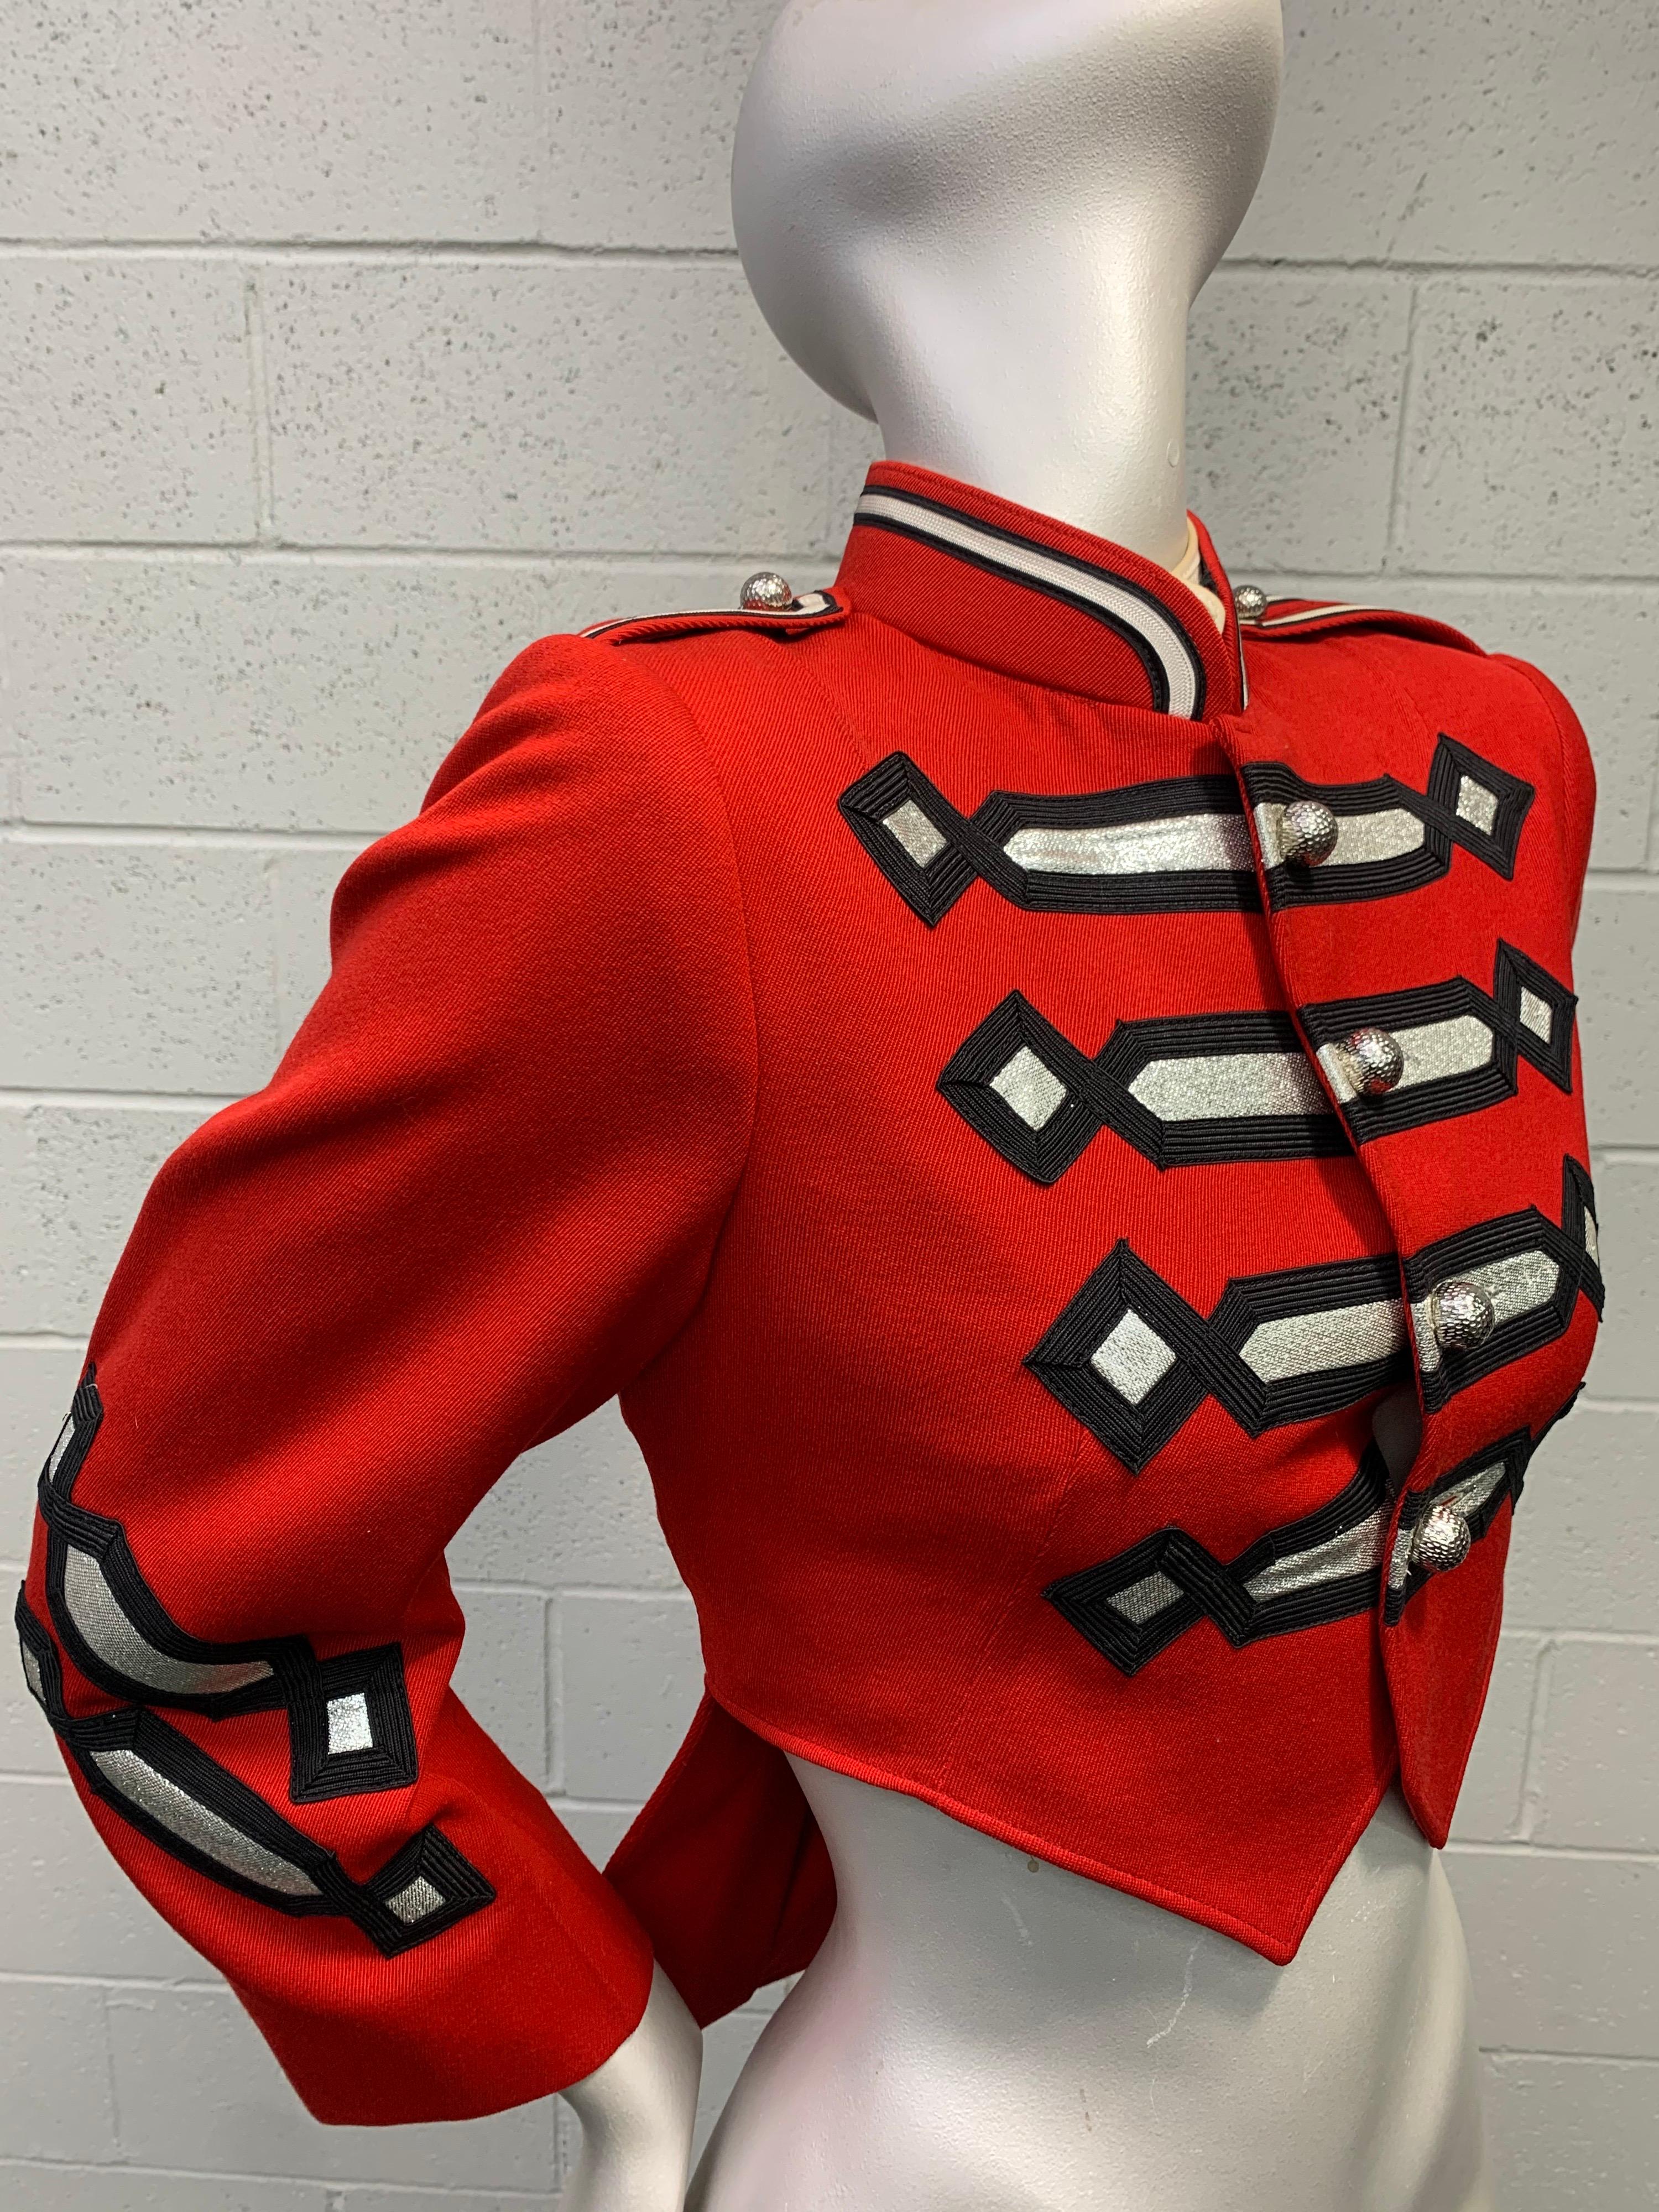 1960 Fruhauf Cardinal Red Band Uniform w/ Military Style & Embroidery Work 3